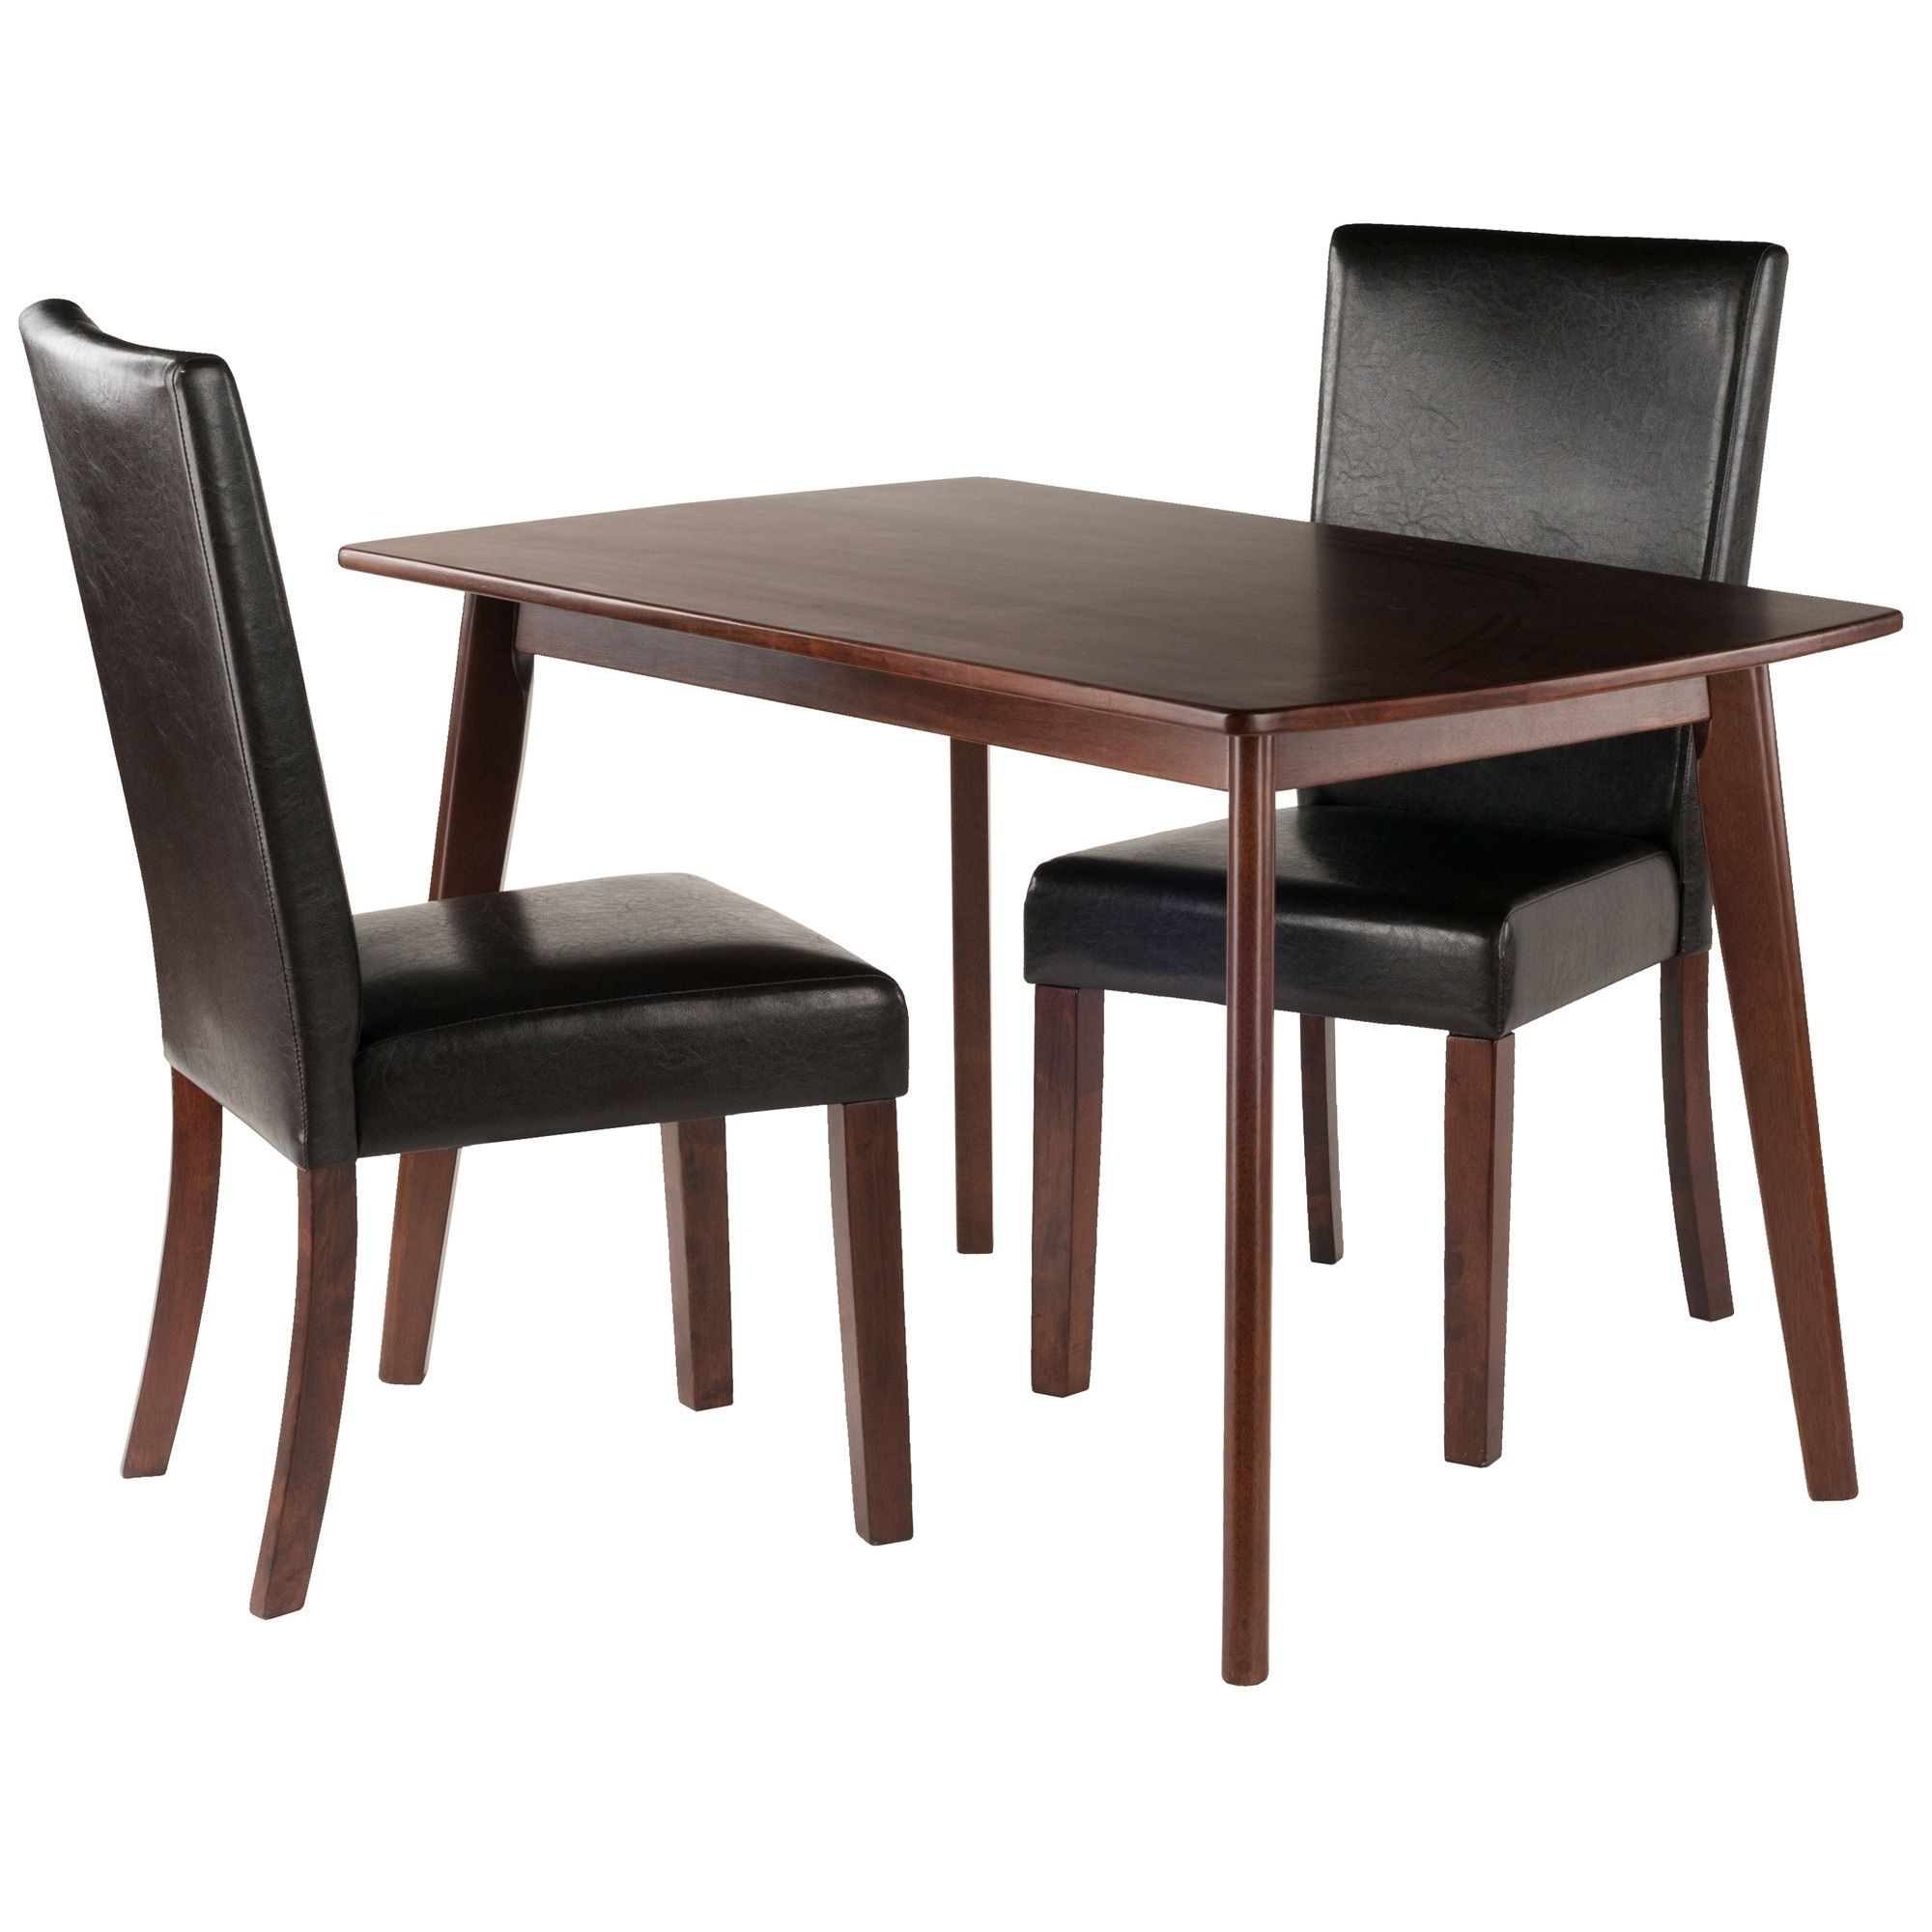 Atwood Transitional Rectangular Dining Tables Intended For Well Known Shaye 3 Pc Set Dining Table W/ Chairs, Brown, Winsome Wood (View 23 of 25)